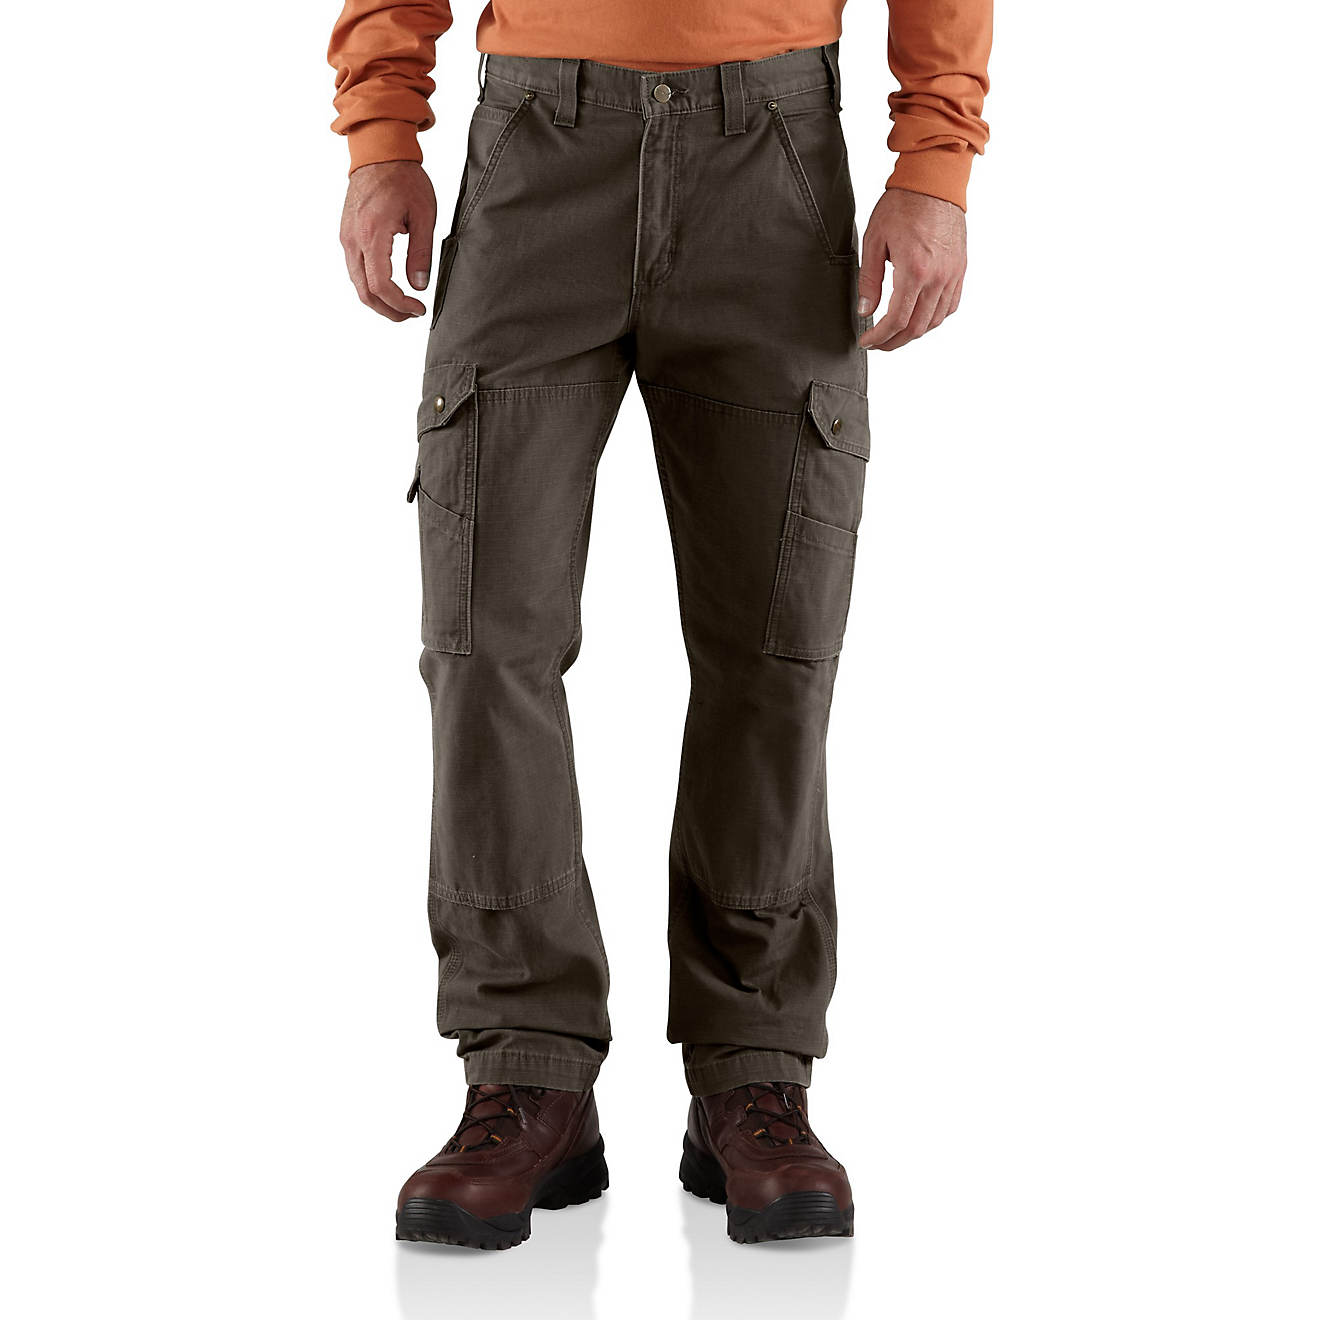 carhartt relaxed fit cargo pants